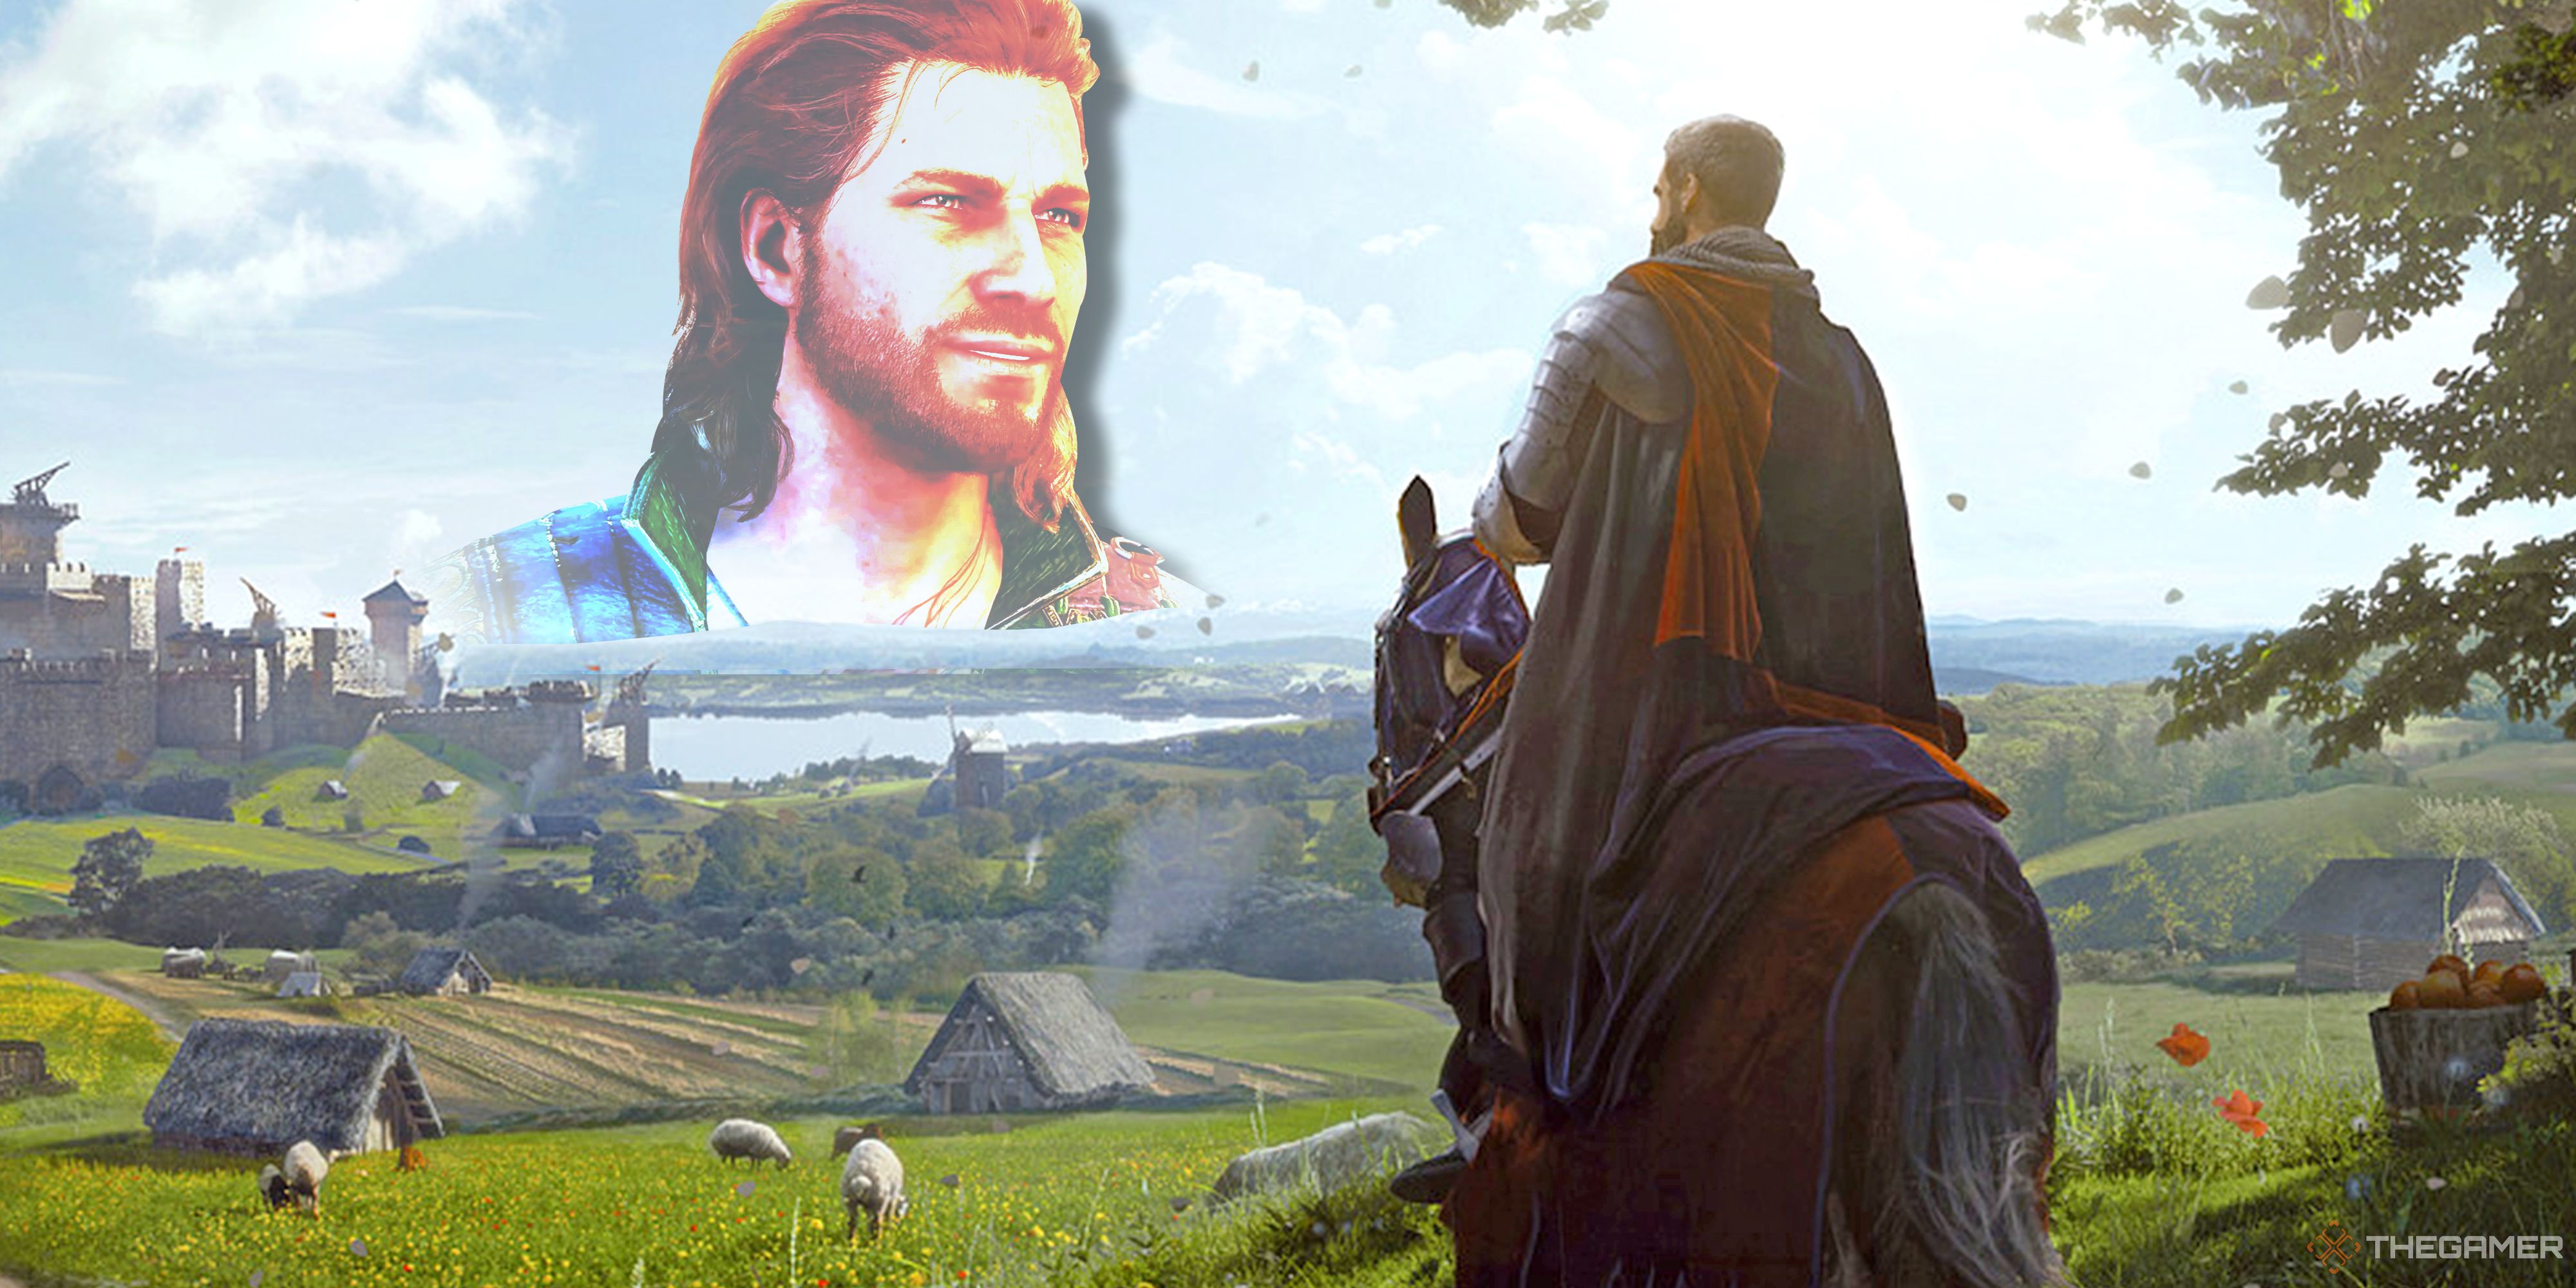 A man in manor lords looking over a field with Gale from Baldur's Gate 3 in the sky